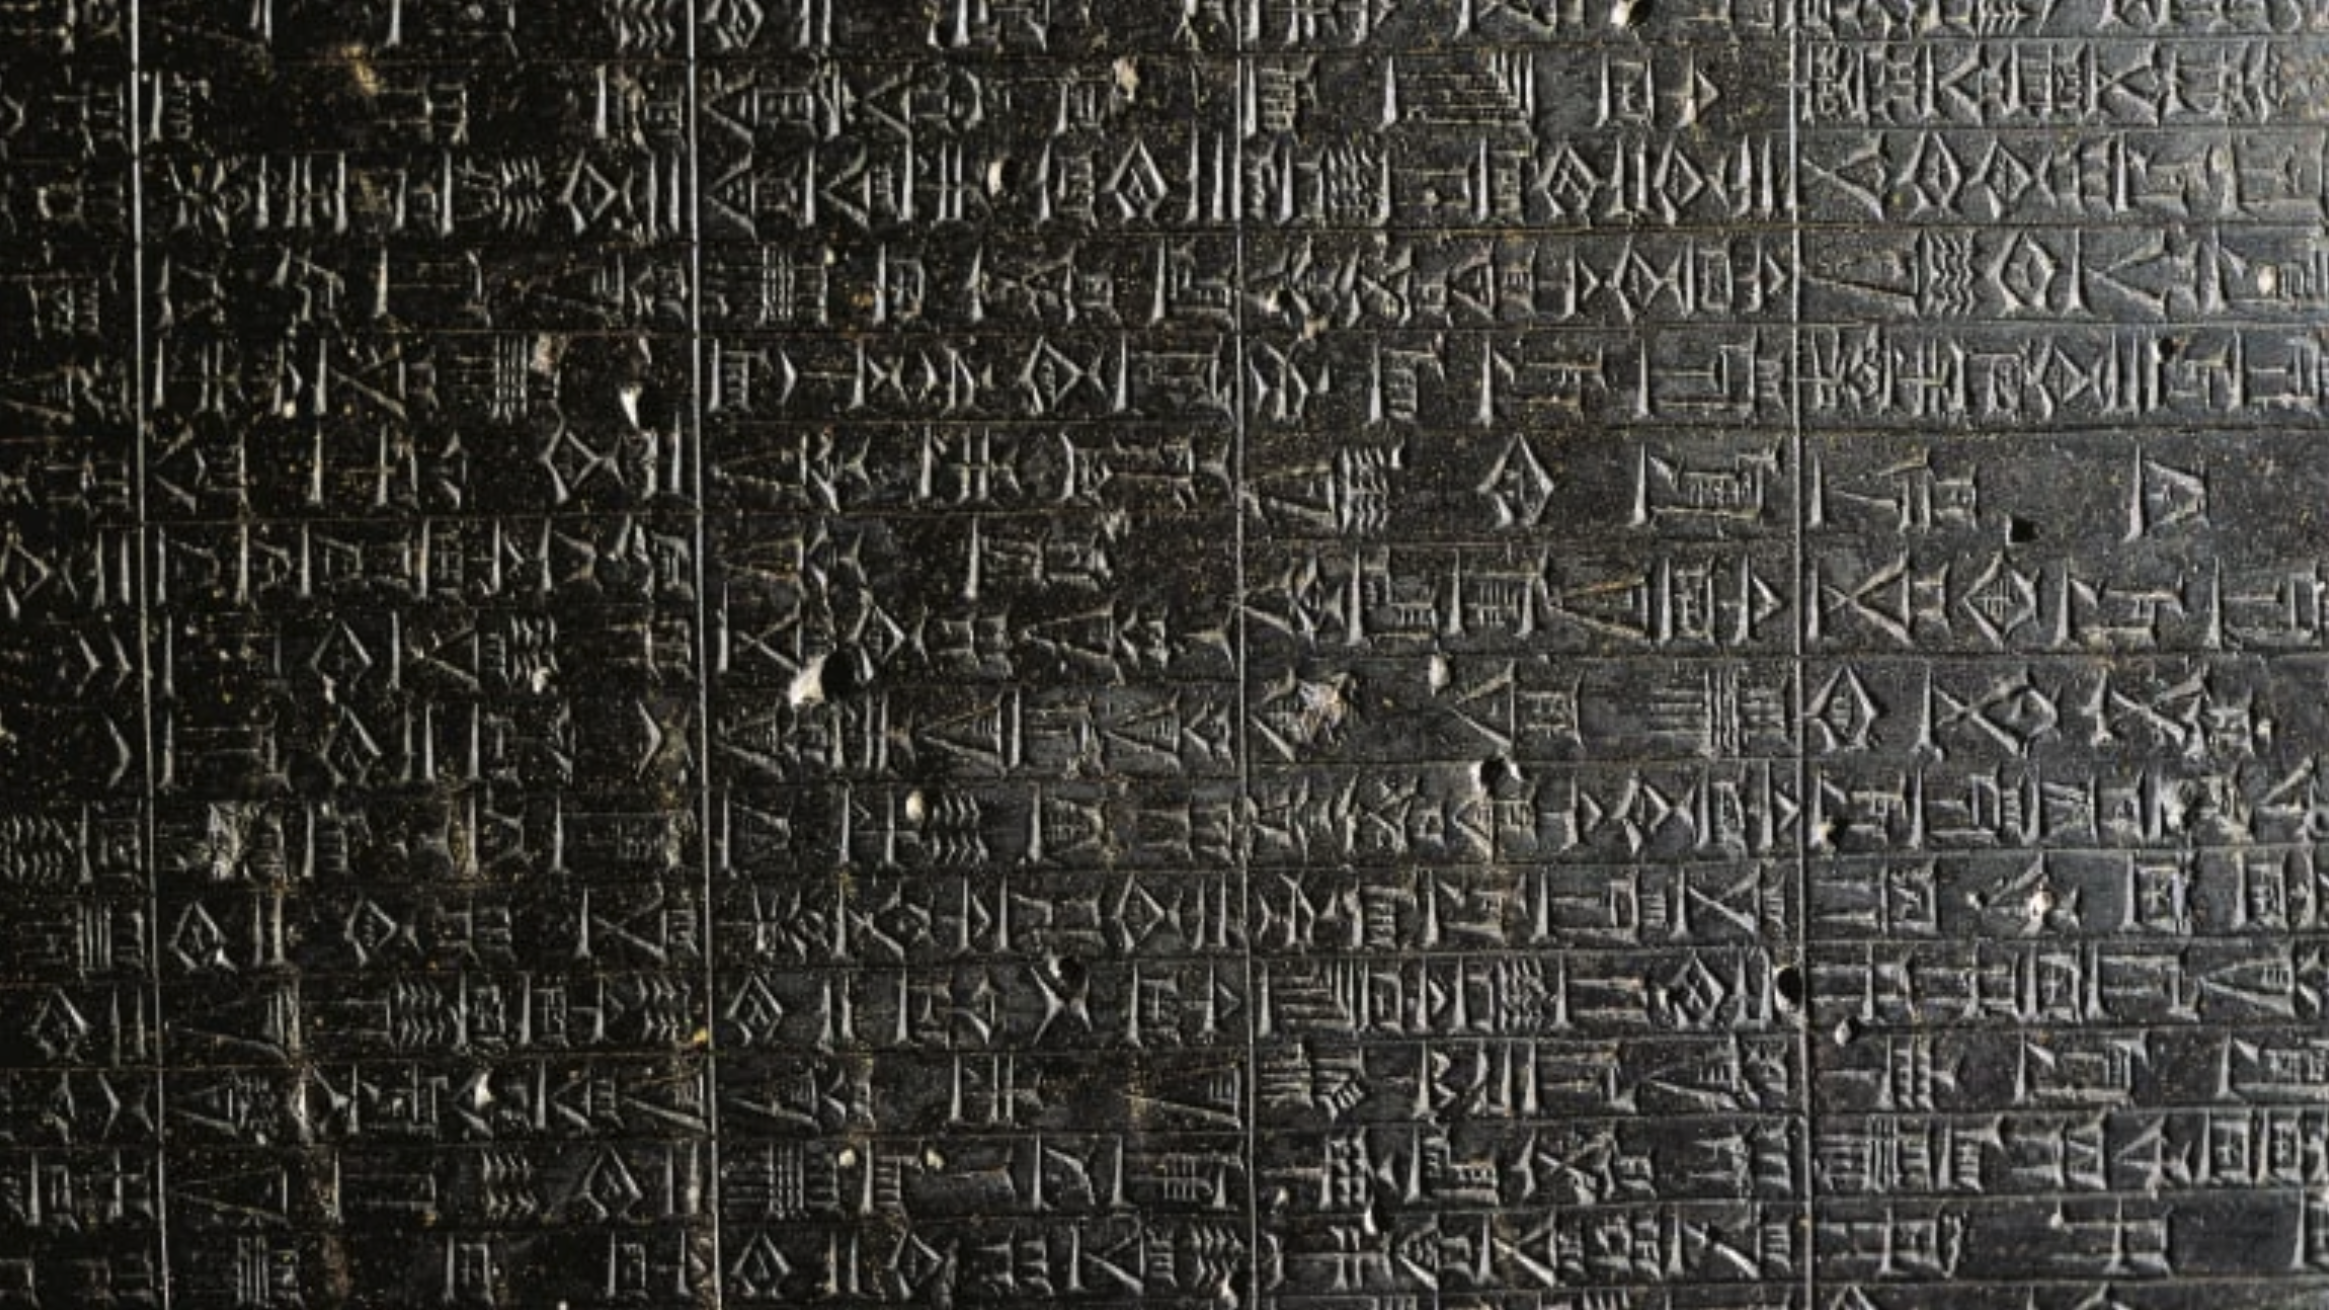 The Code of Hammurabi is one of the earliest recorded legal codes, dating over 3,500 years ago